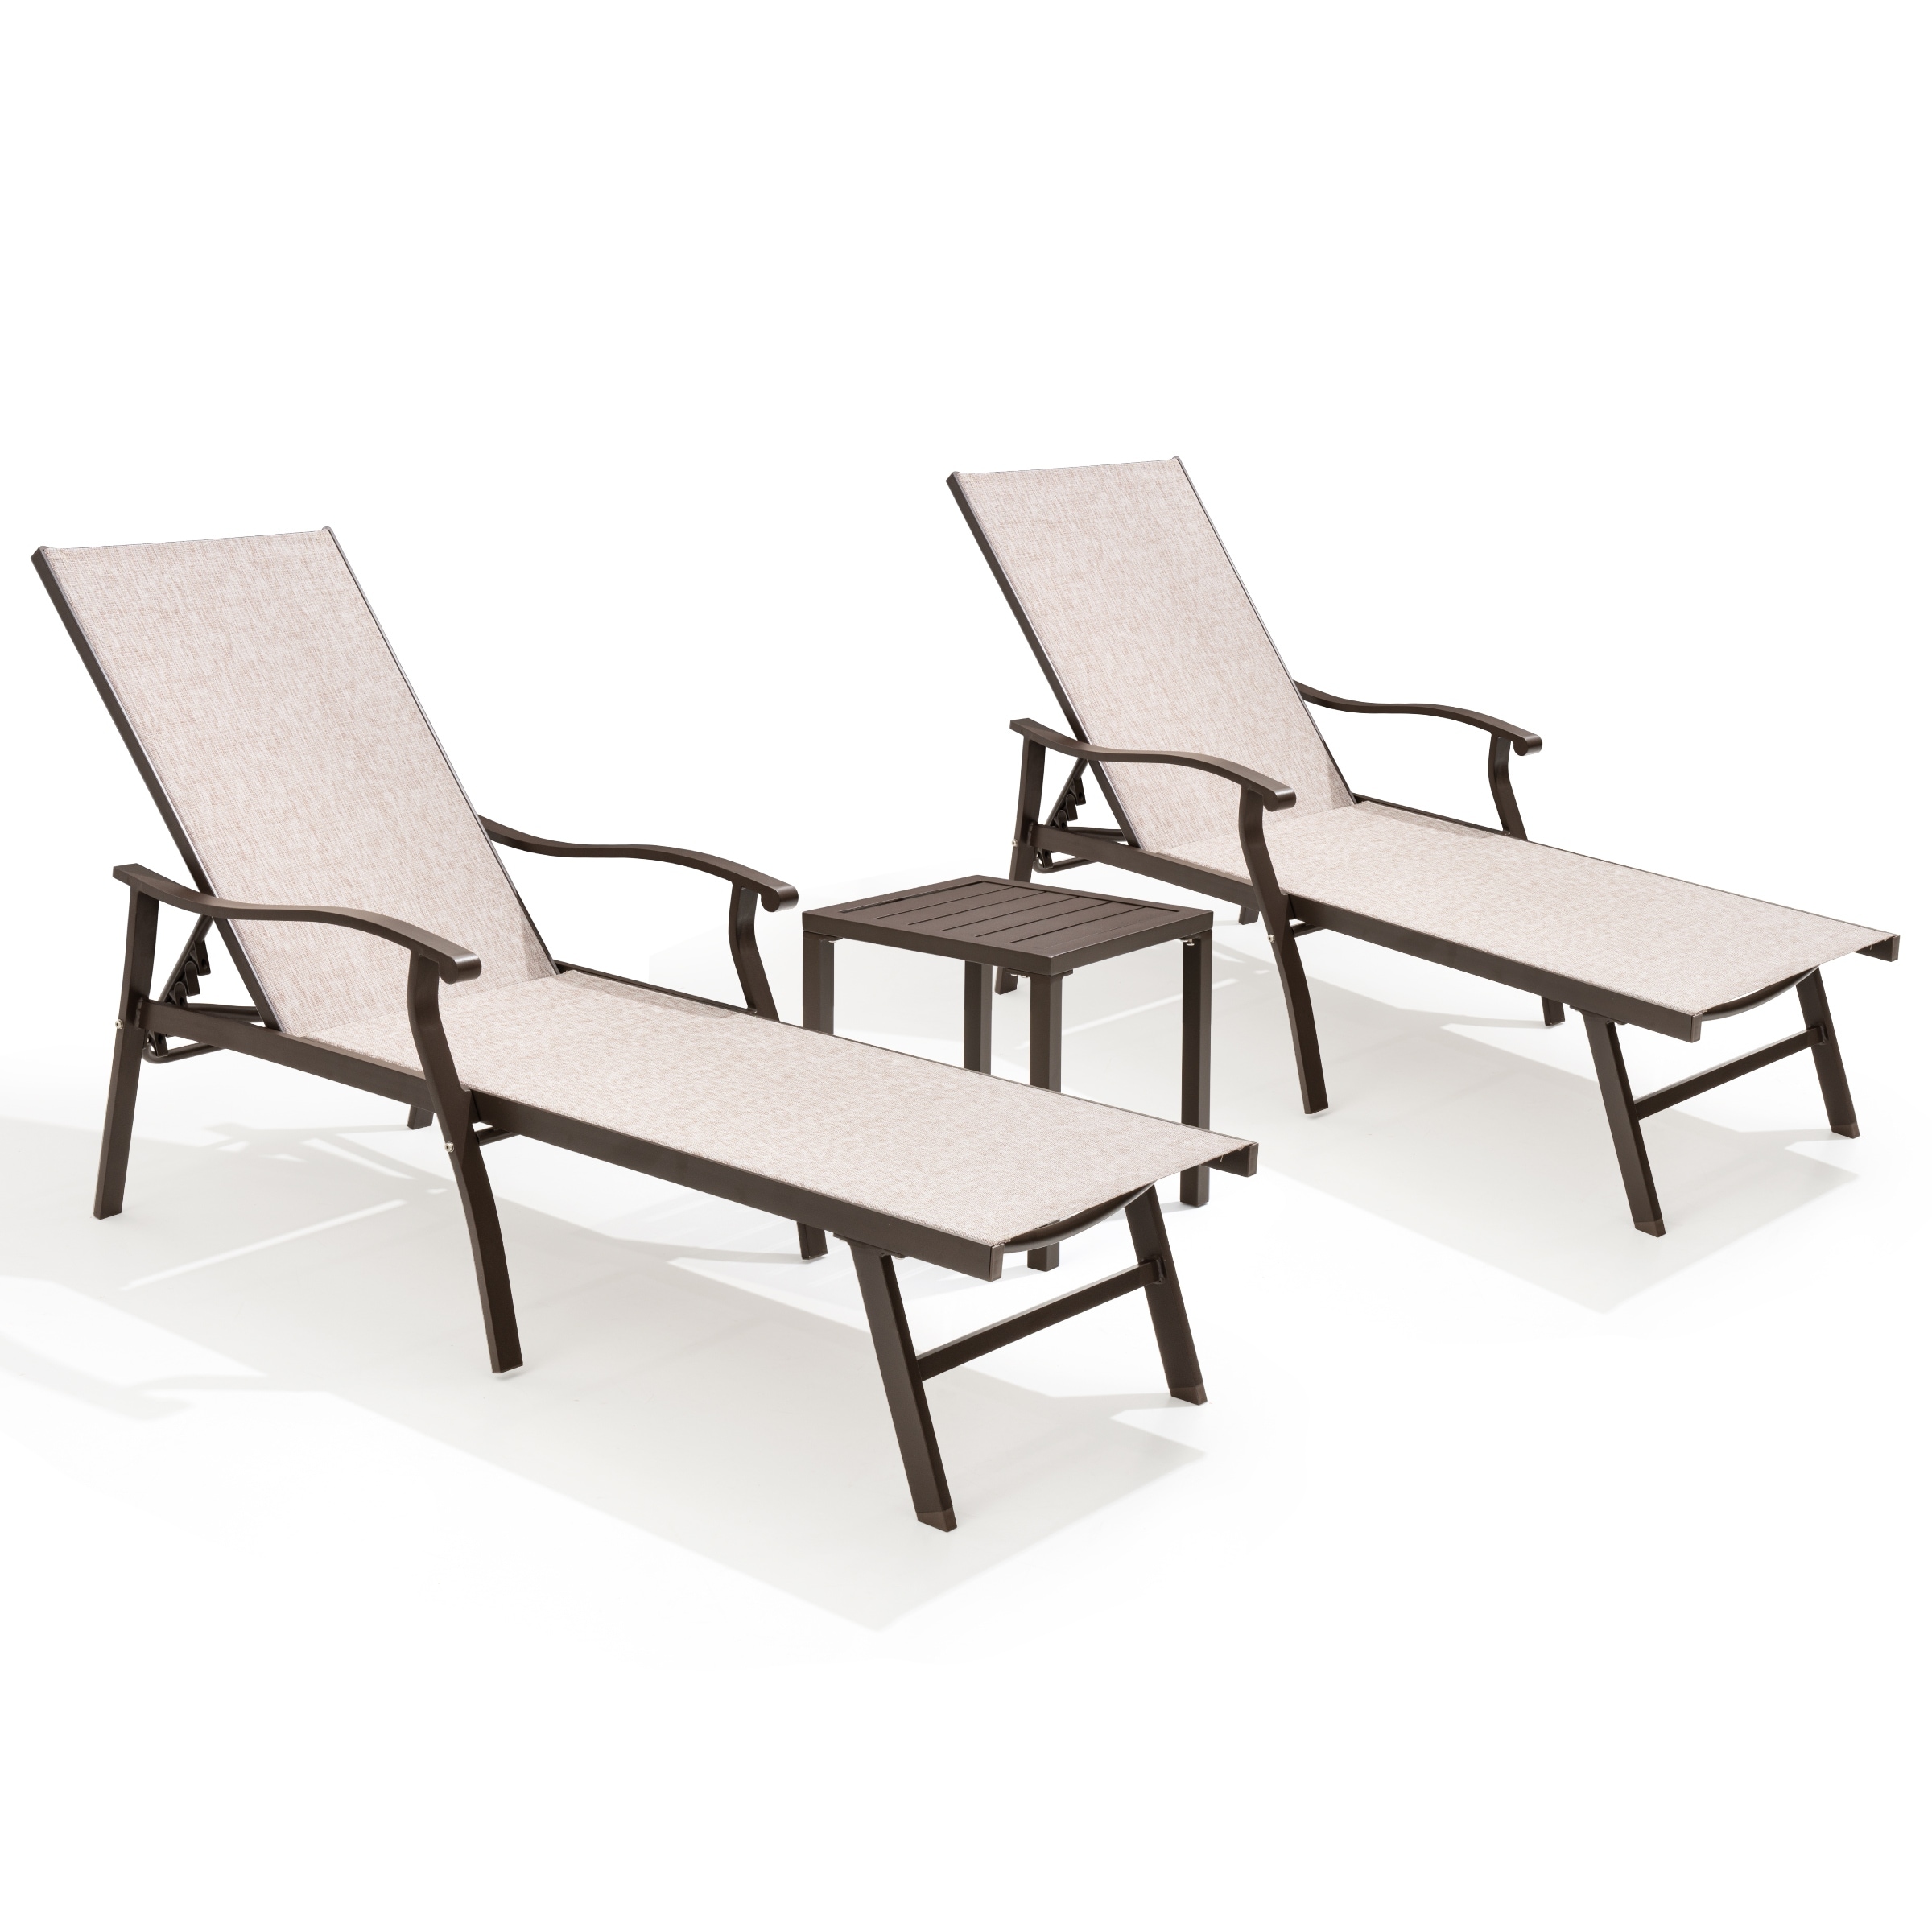 Pool Sunlounger Chaise Lounge Set With 2-piece Lounge Chairs And Side Table - See Picture